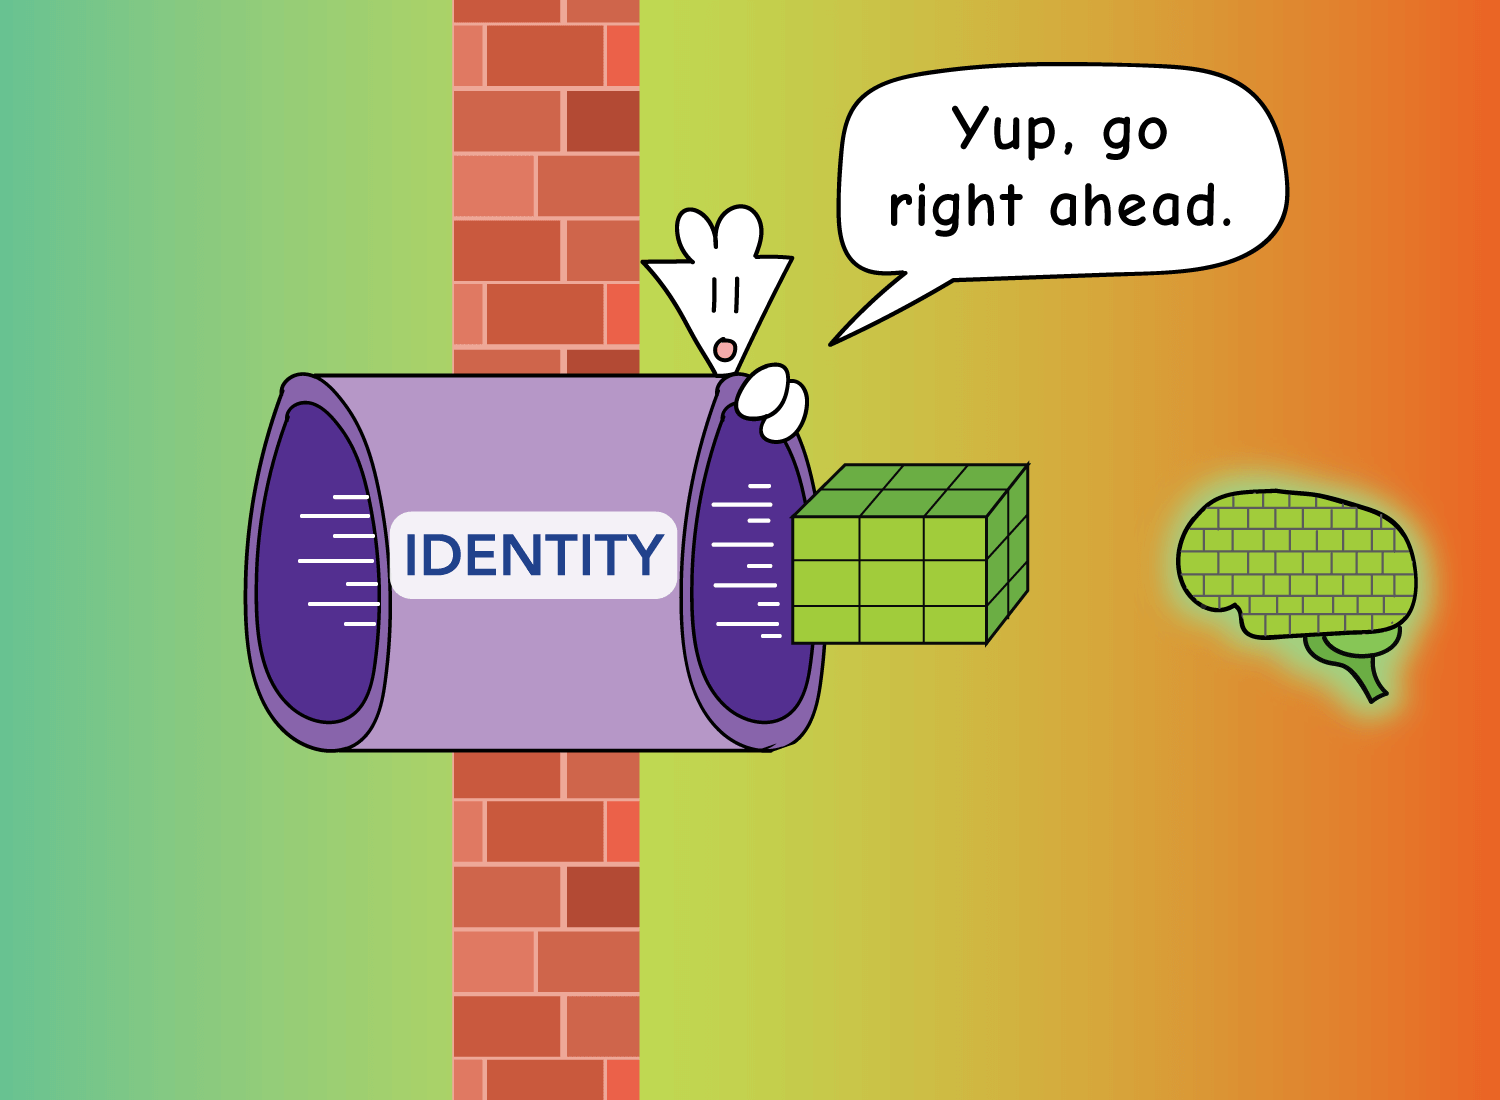 opening up the identity filter to go to the mind